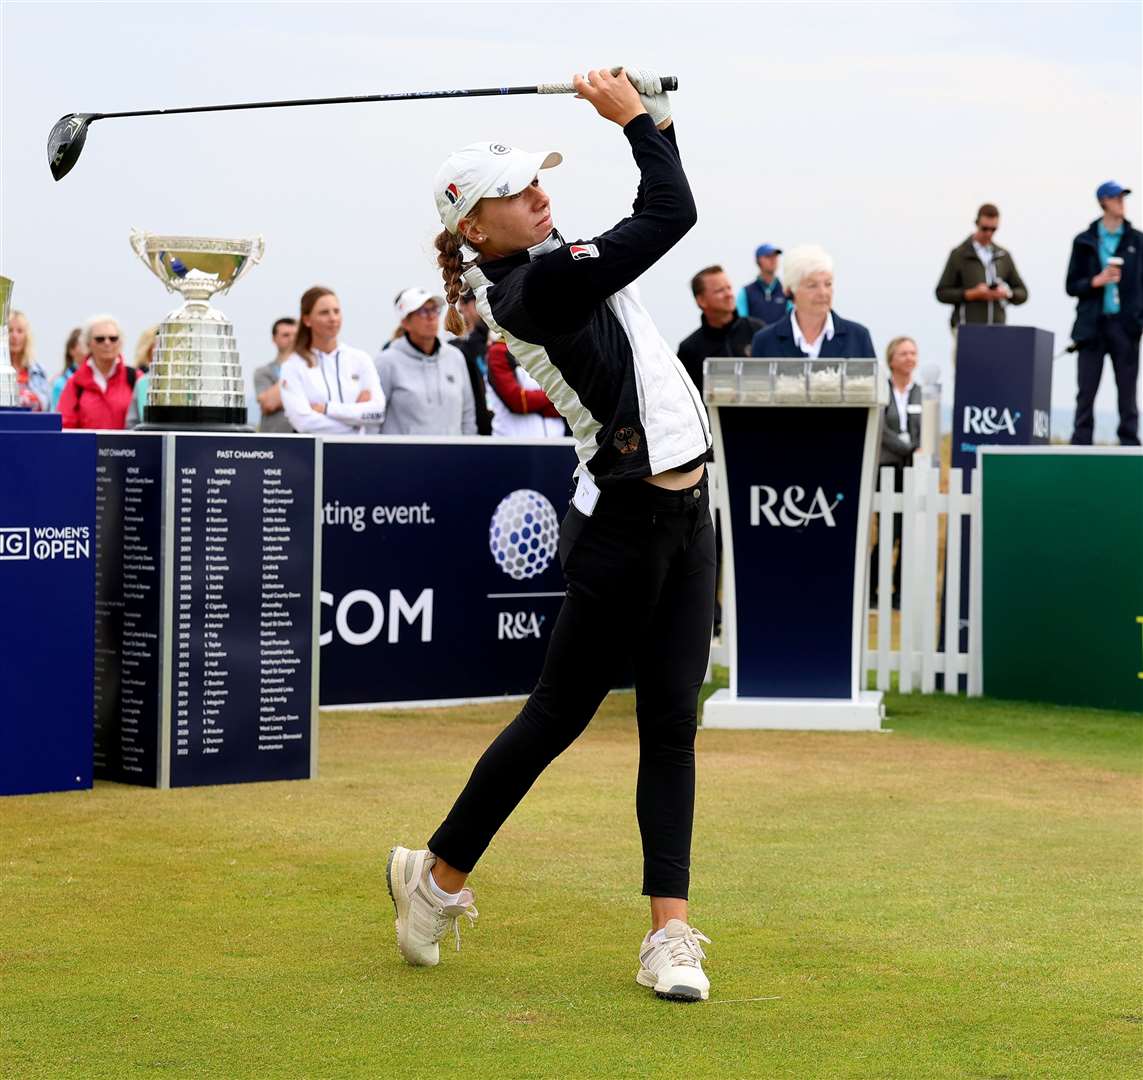 Chiara Horder is the third woman to win the amateur title at Prince's. Picture: The R&A